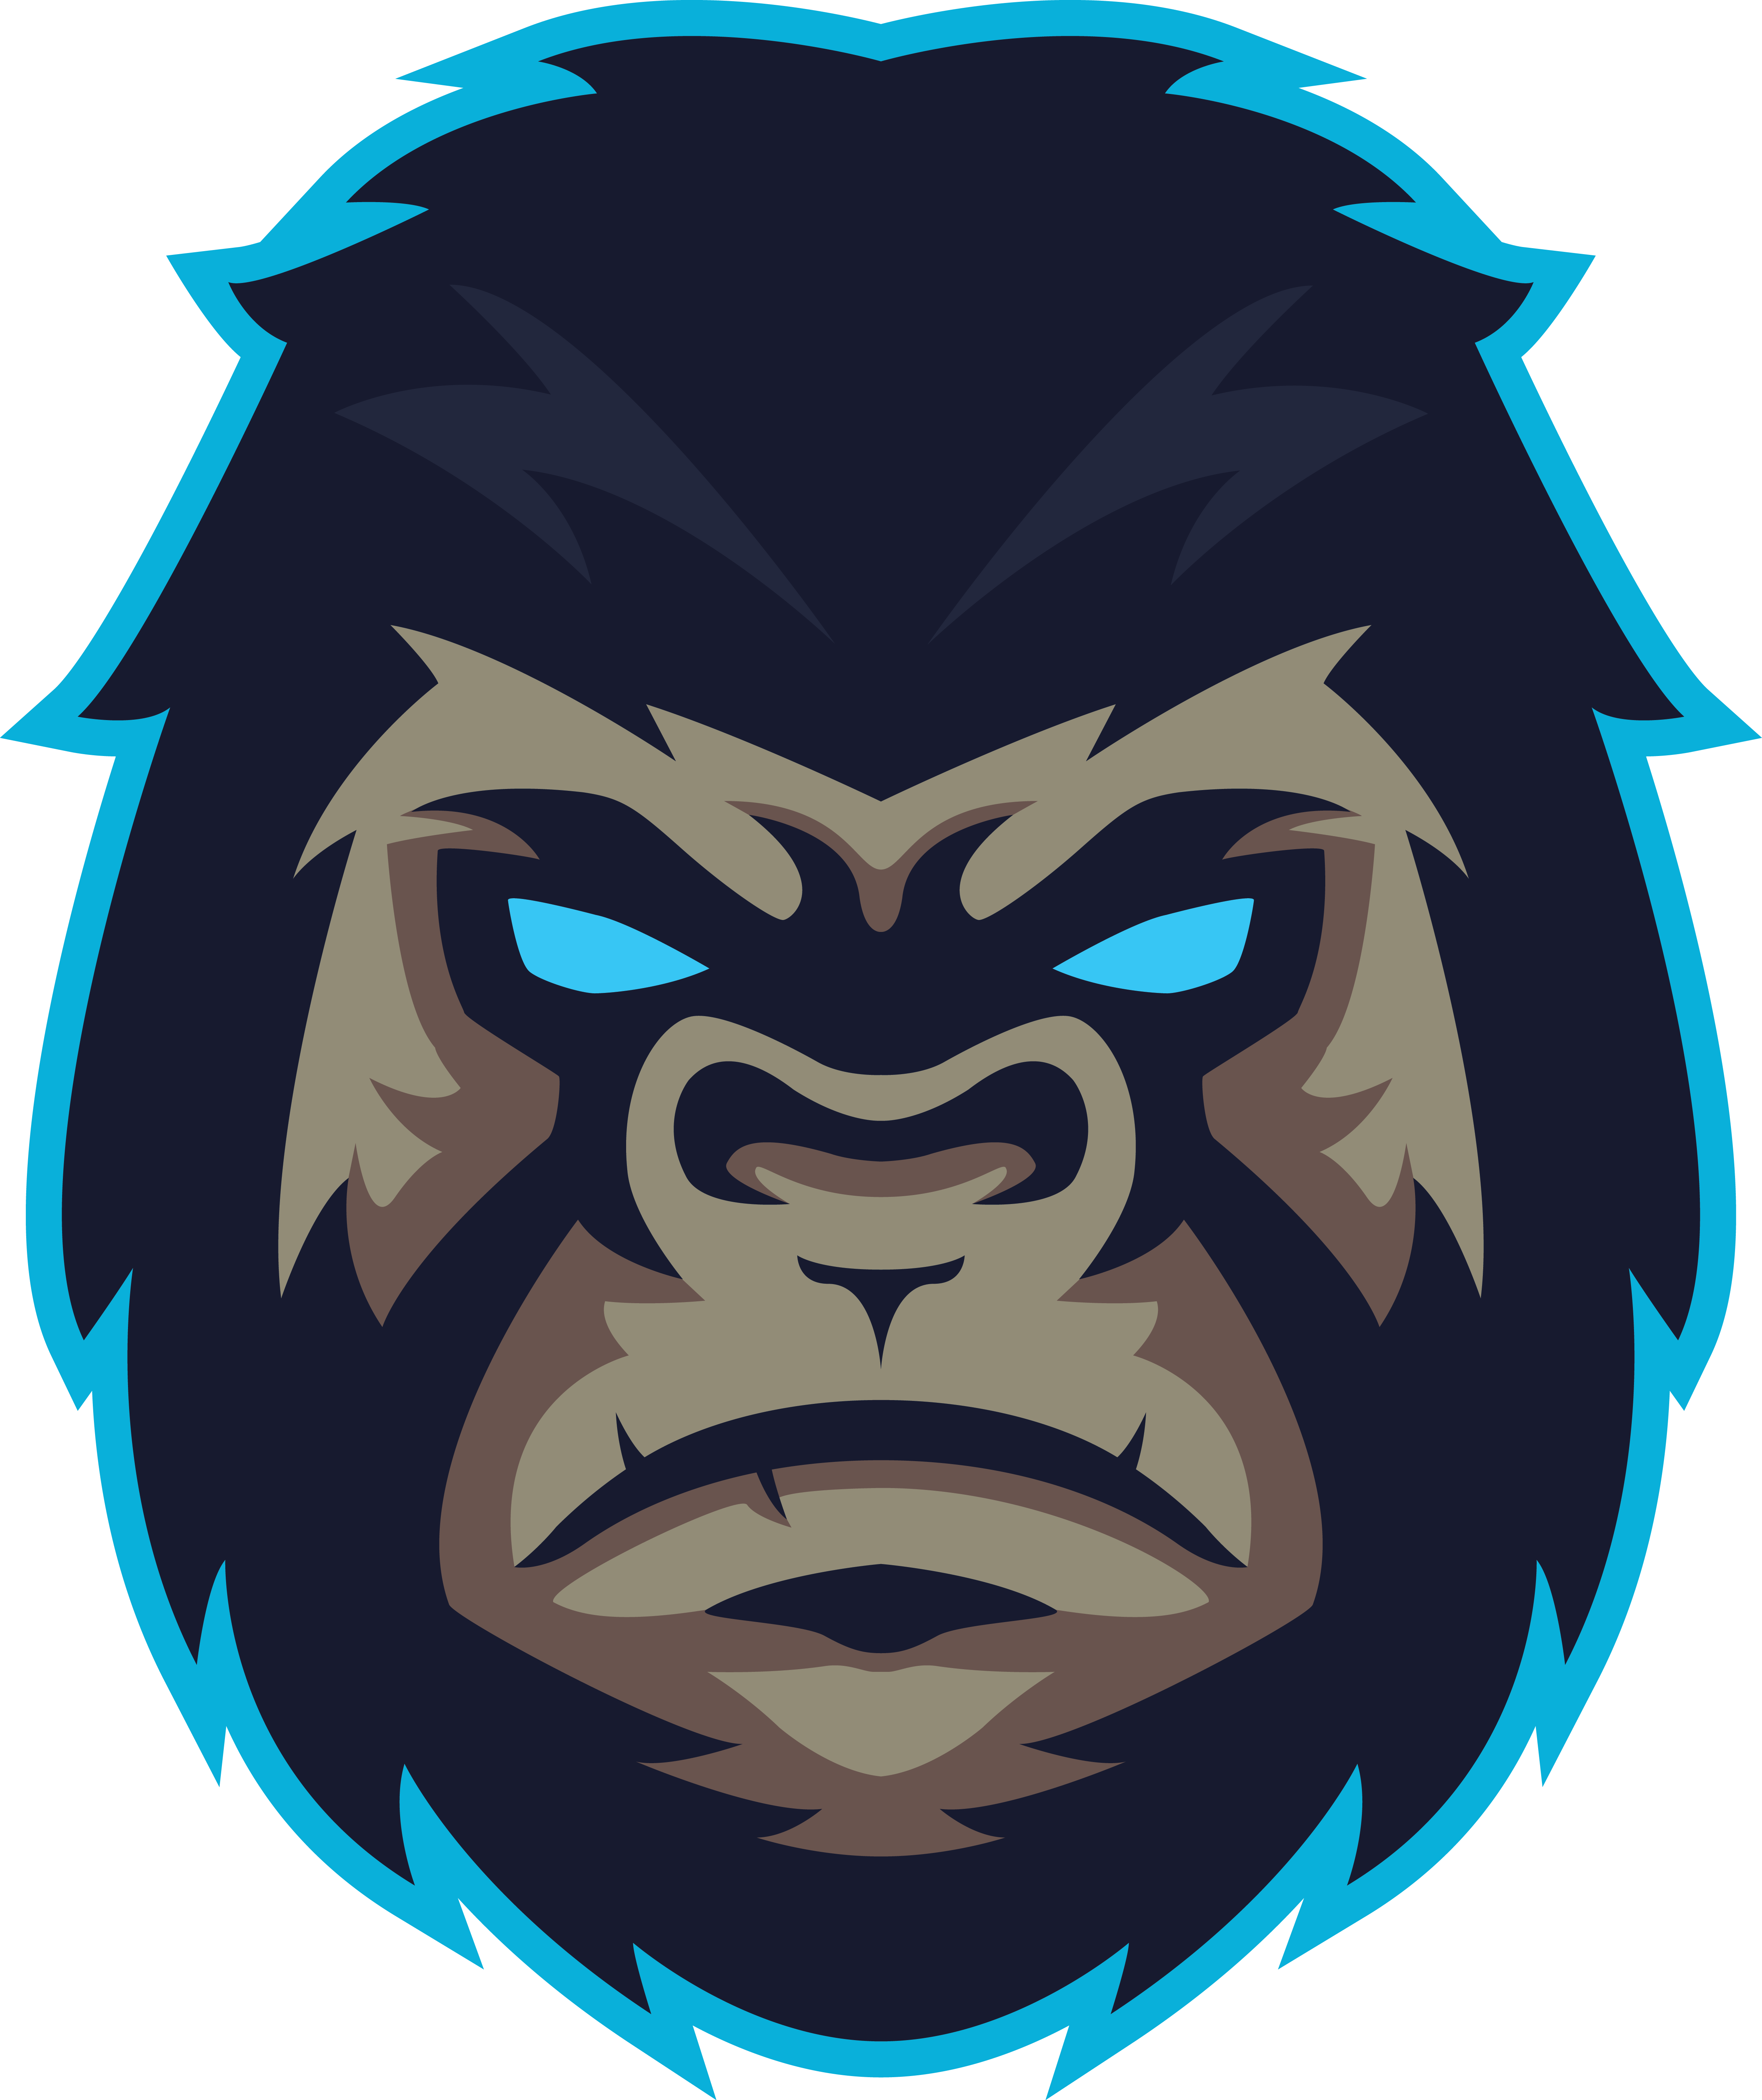 Profile Twitch Youtube Avatar Discord Free Download Image PNG Image